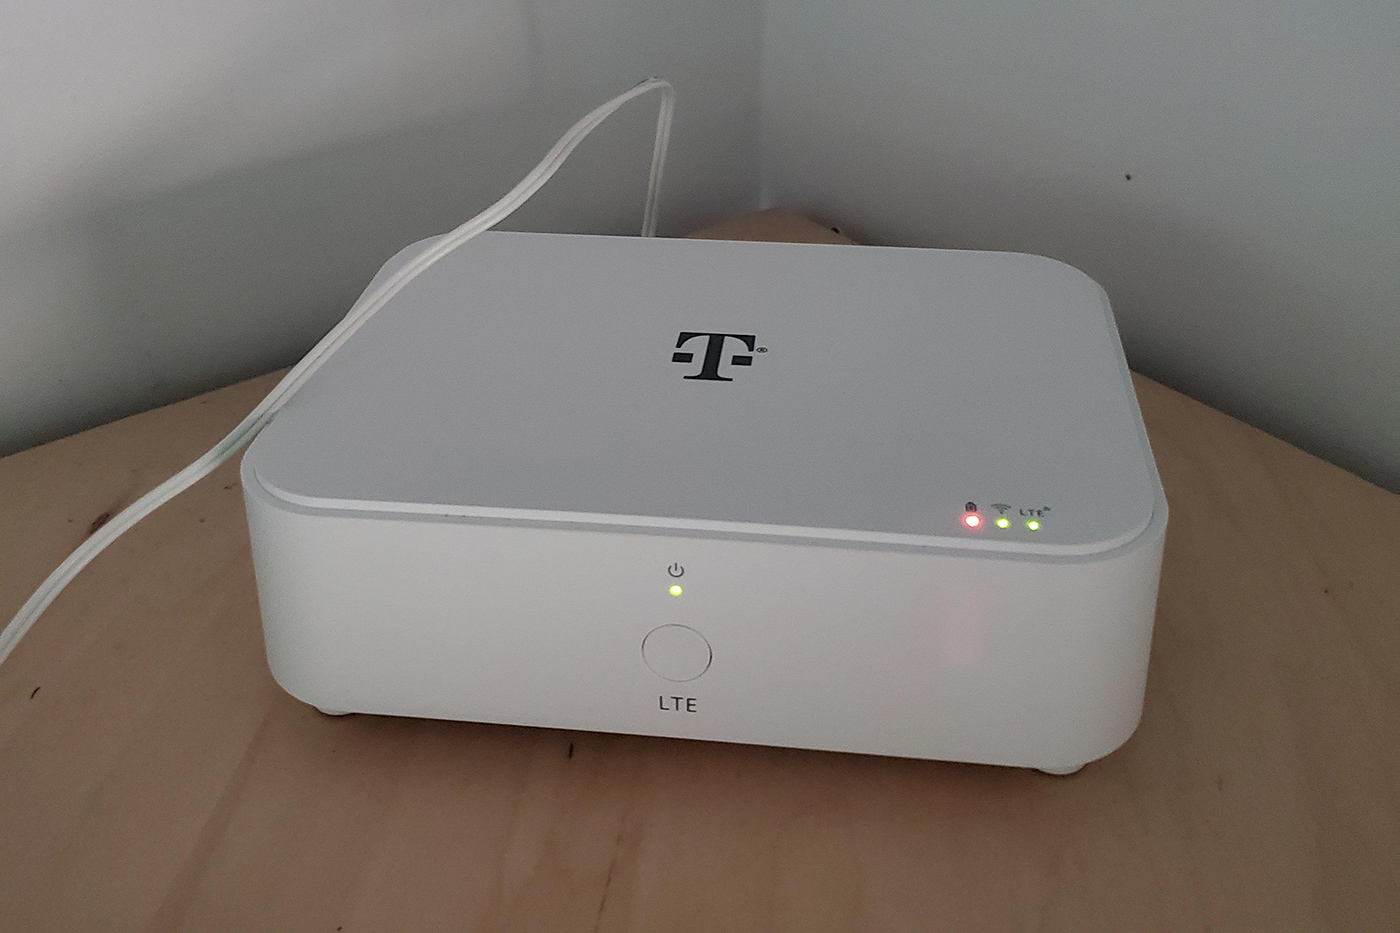 T-Mobile Home Internet customer shares setup details and photos of router - TmoNews